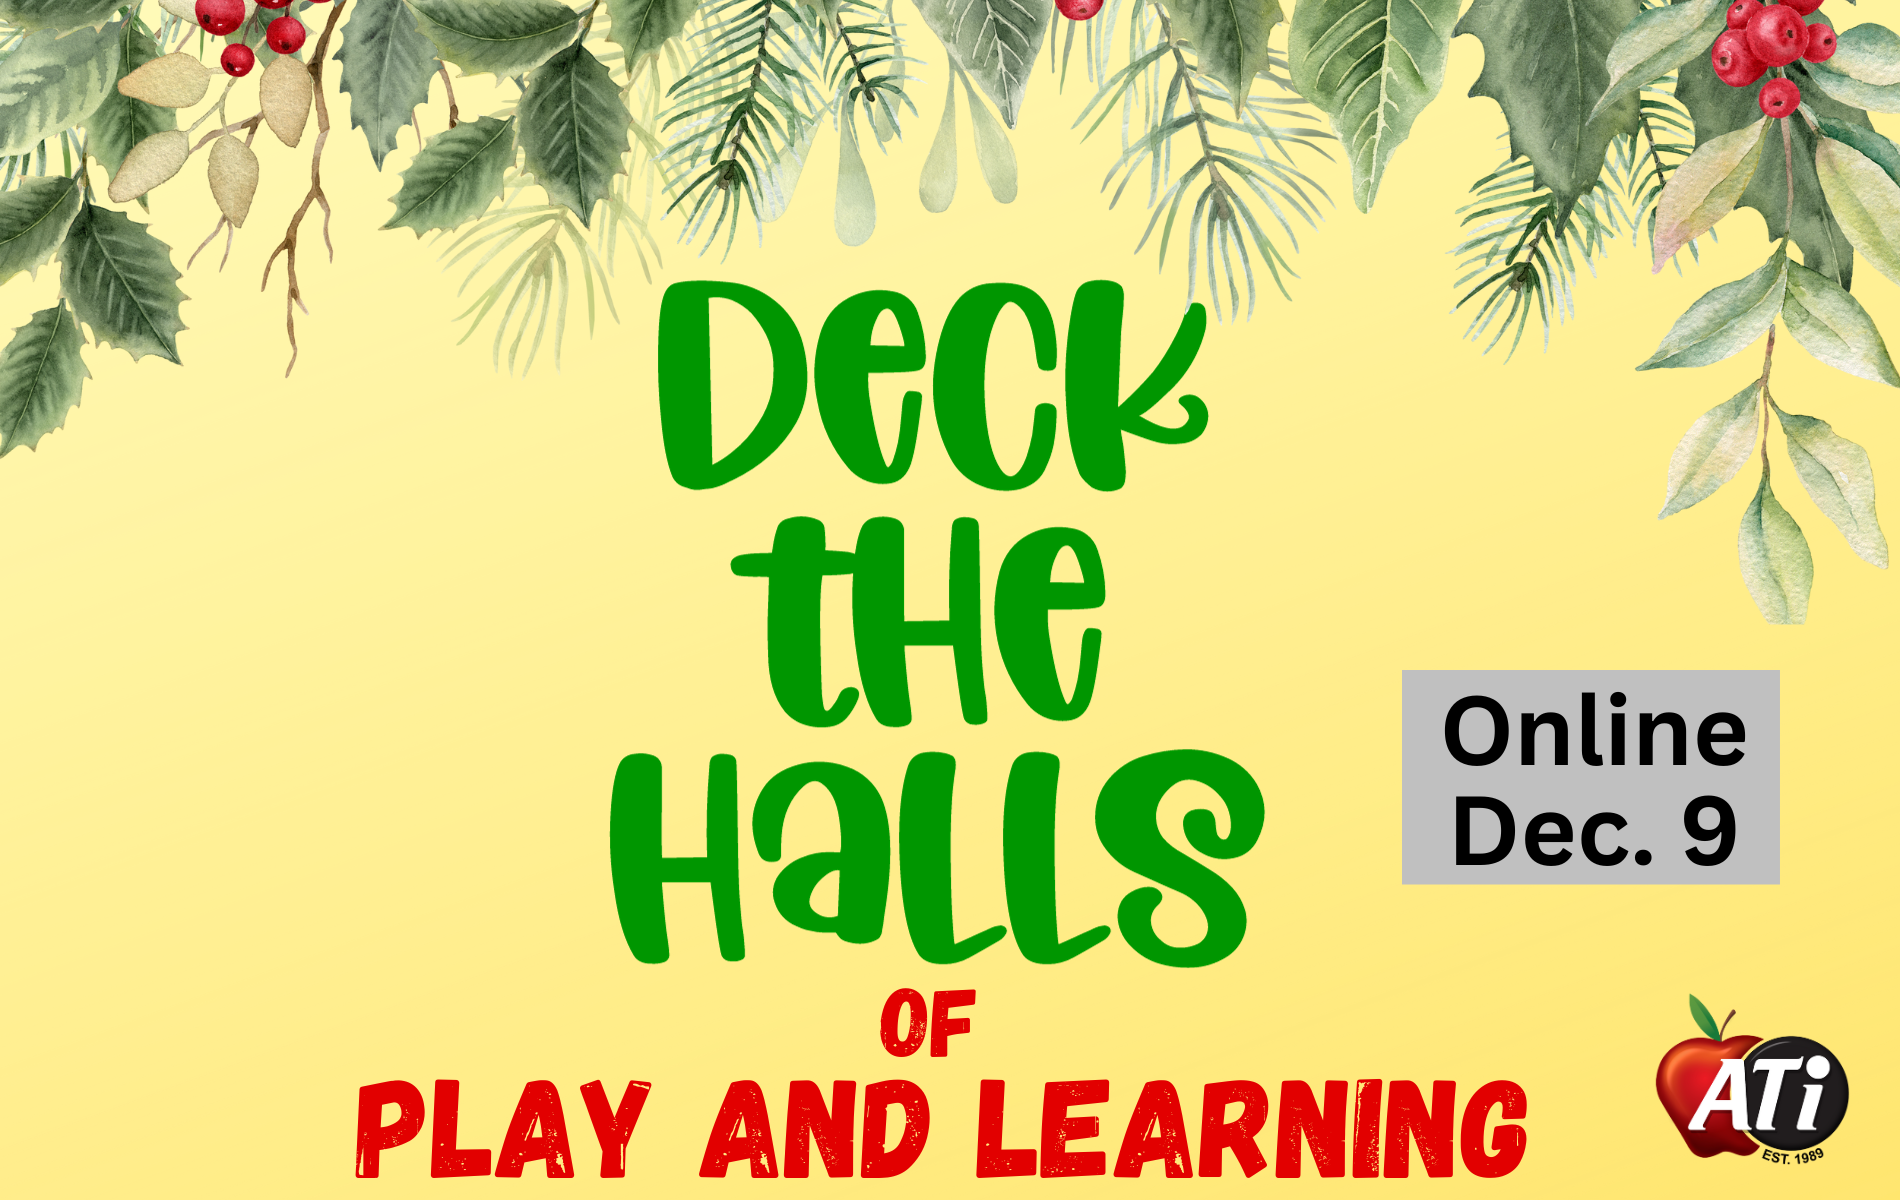 ATI's graphic Deck the Halls of Play and Learning online